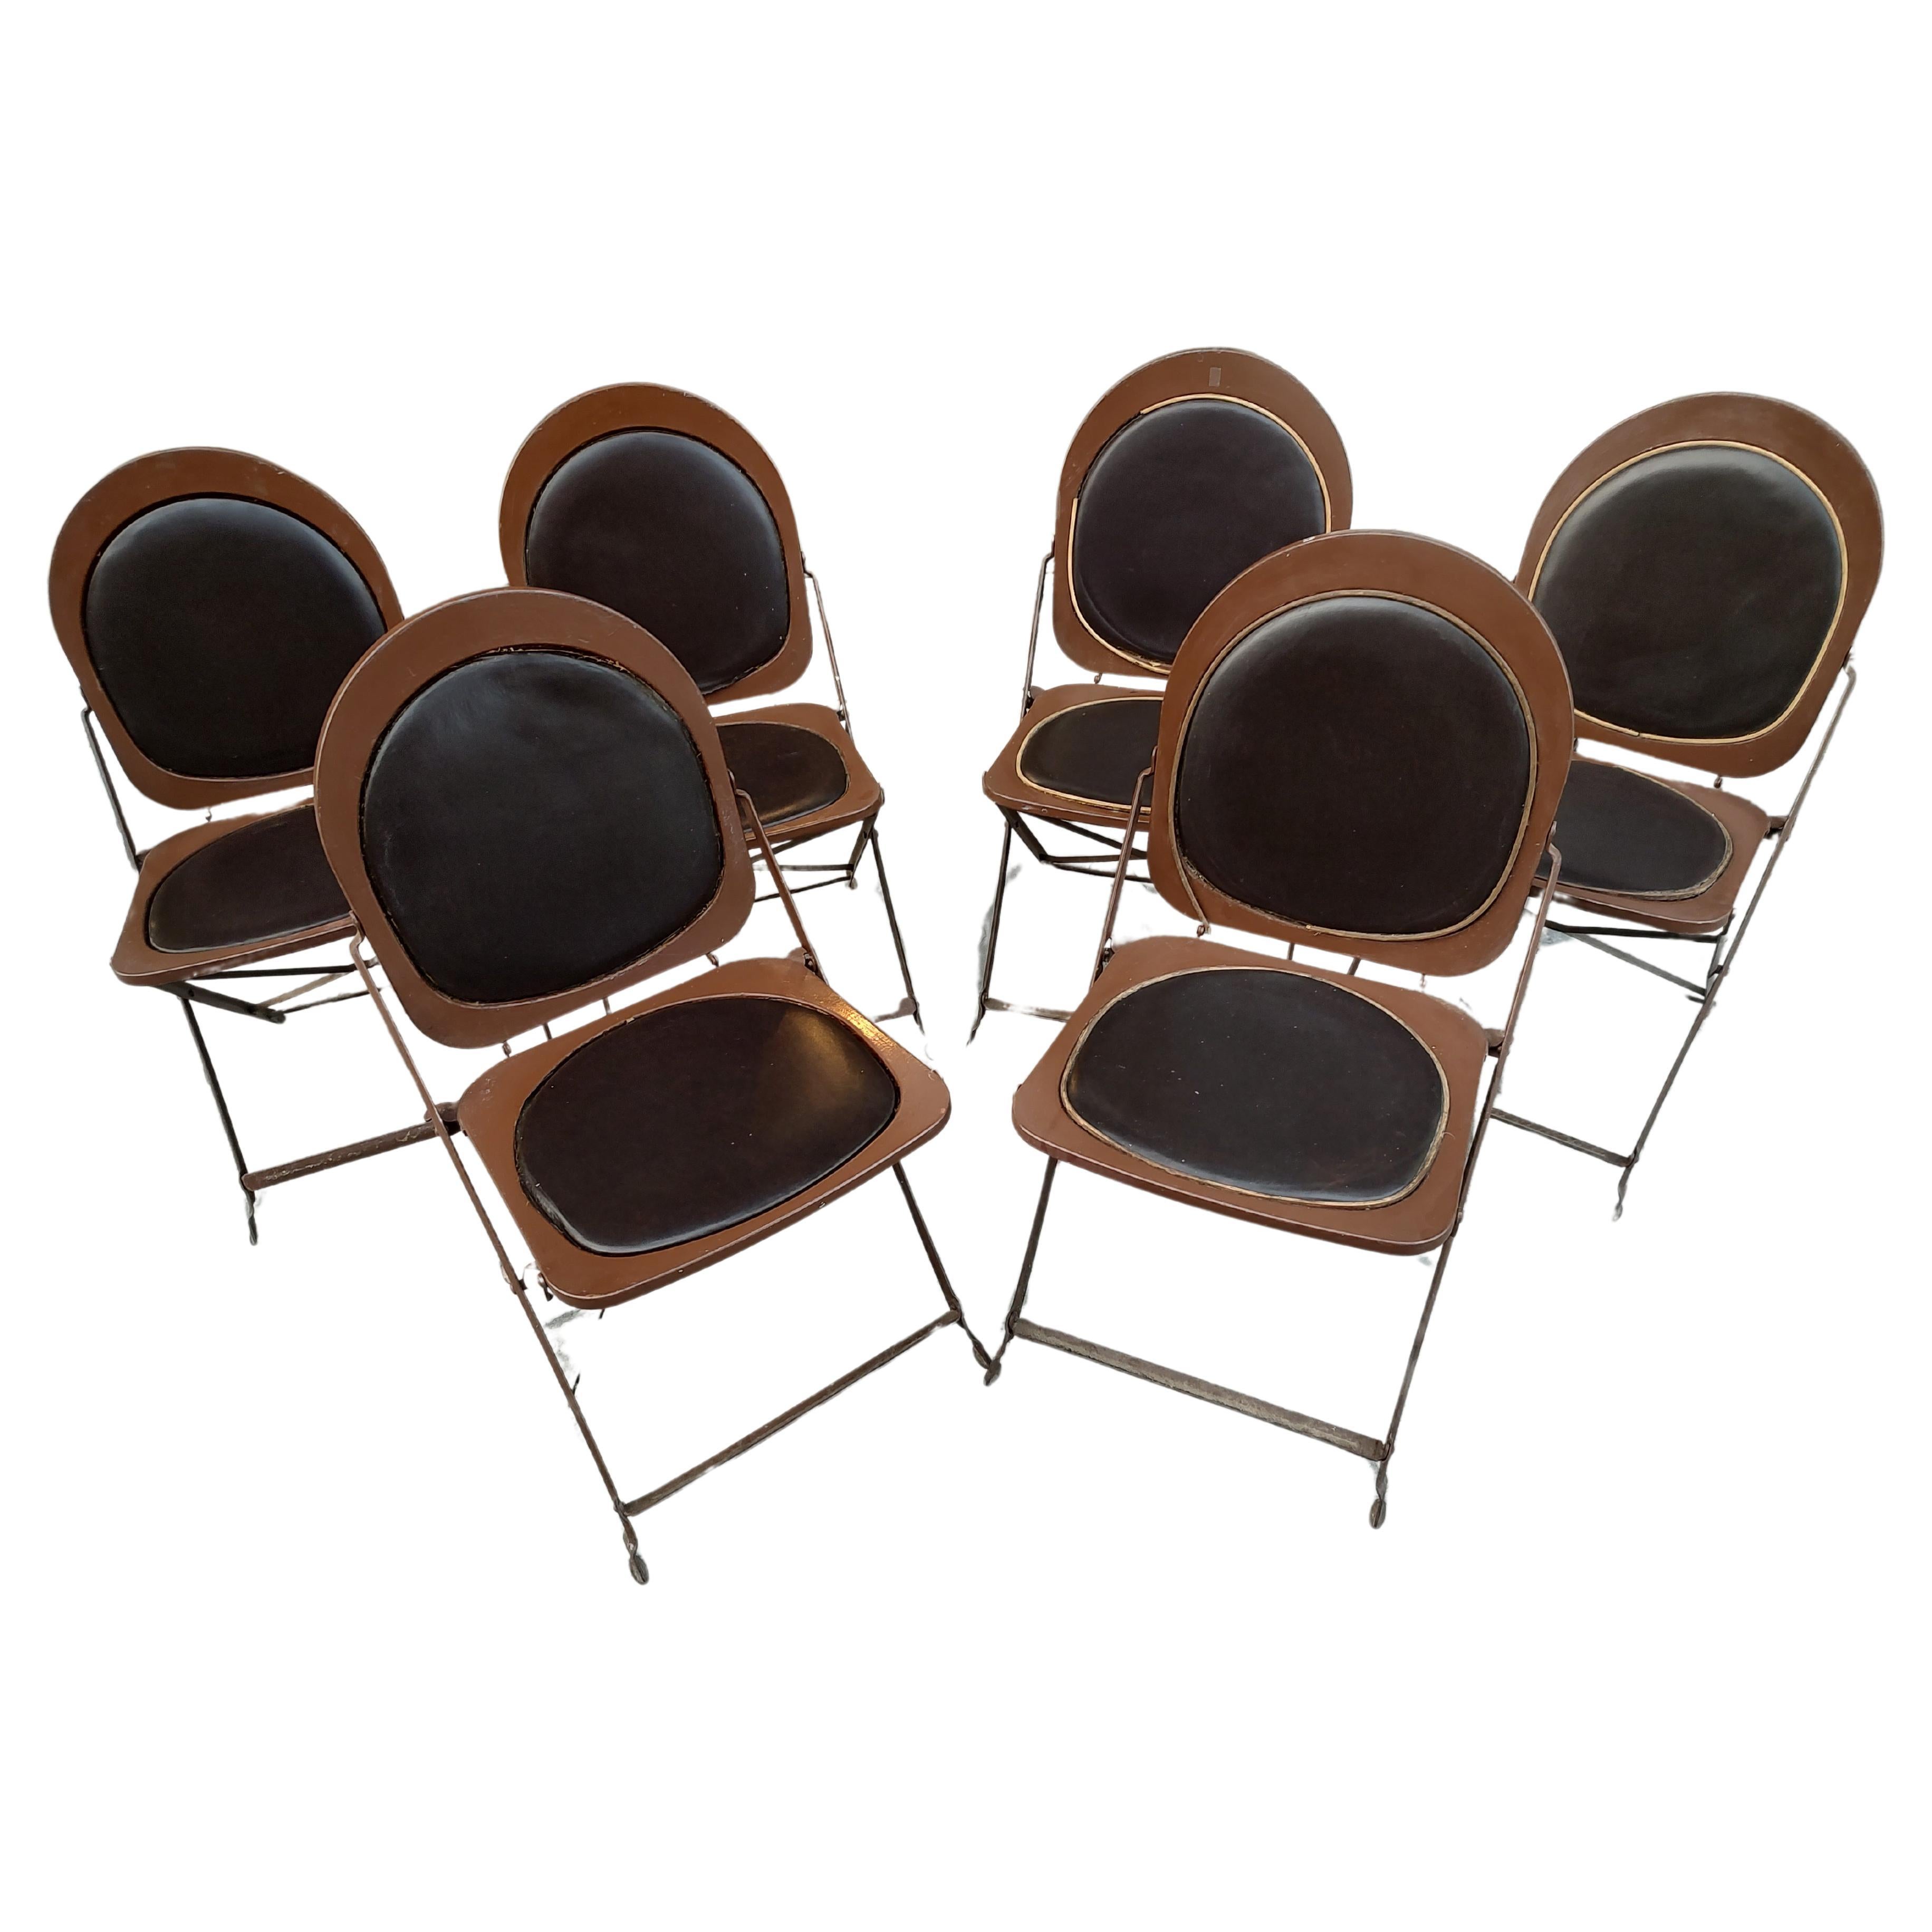 Set of Six Mid-Century Modern Sculptural Unique Folding Chairs For Sale